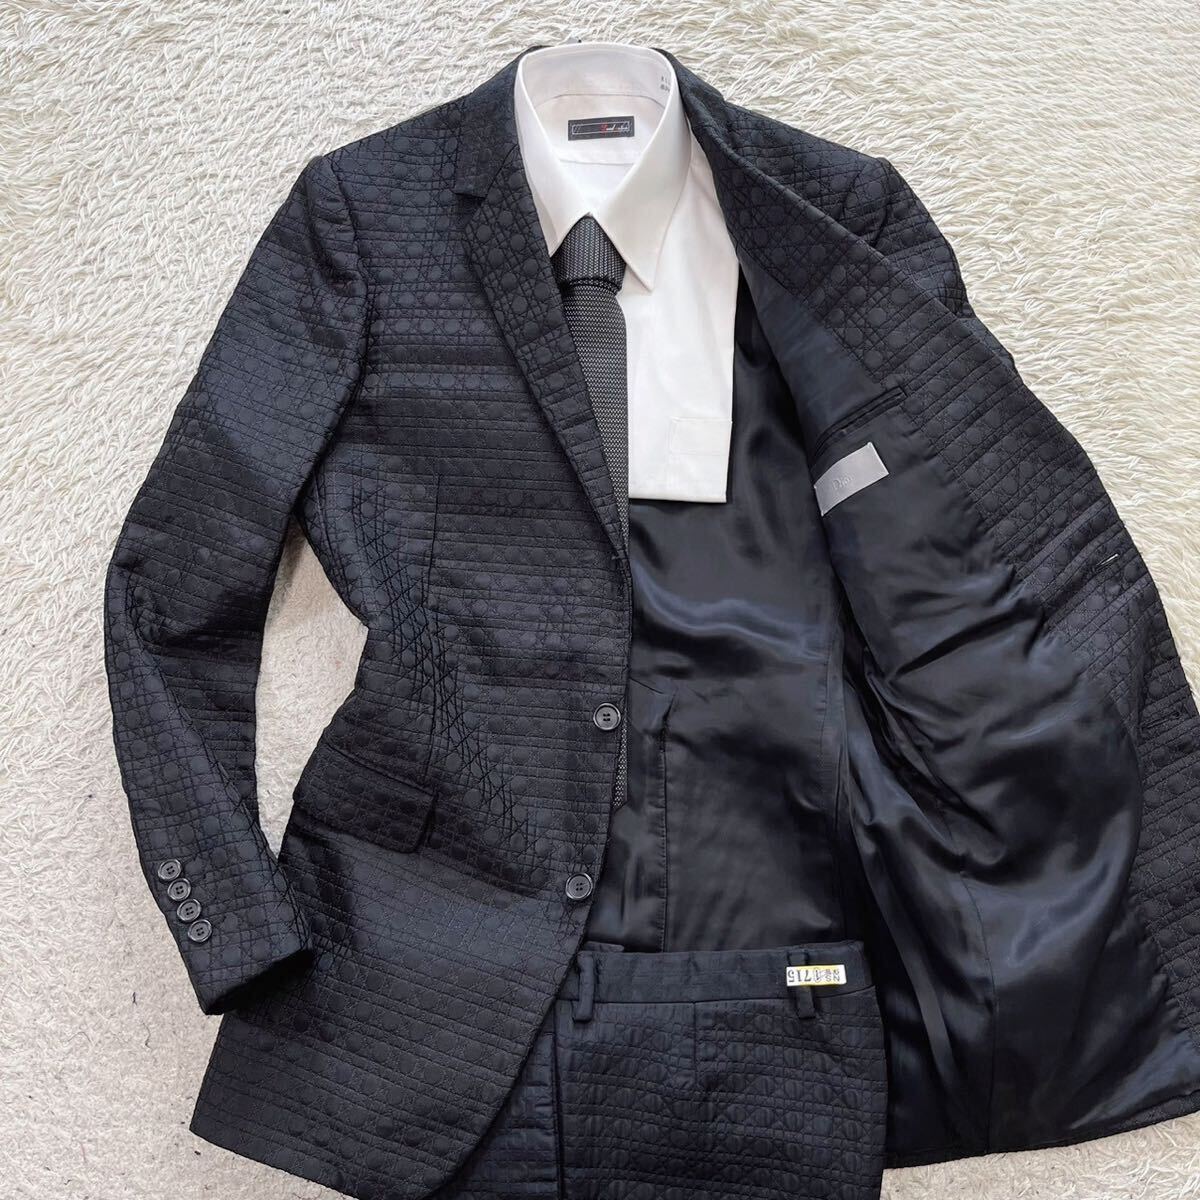  ultimate beautiful goods * rare size!! Dior Homme [ illusion. excellent article ]Dior suit setup tailored jacket total pattern black black XL rank 